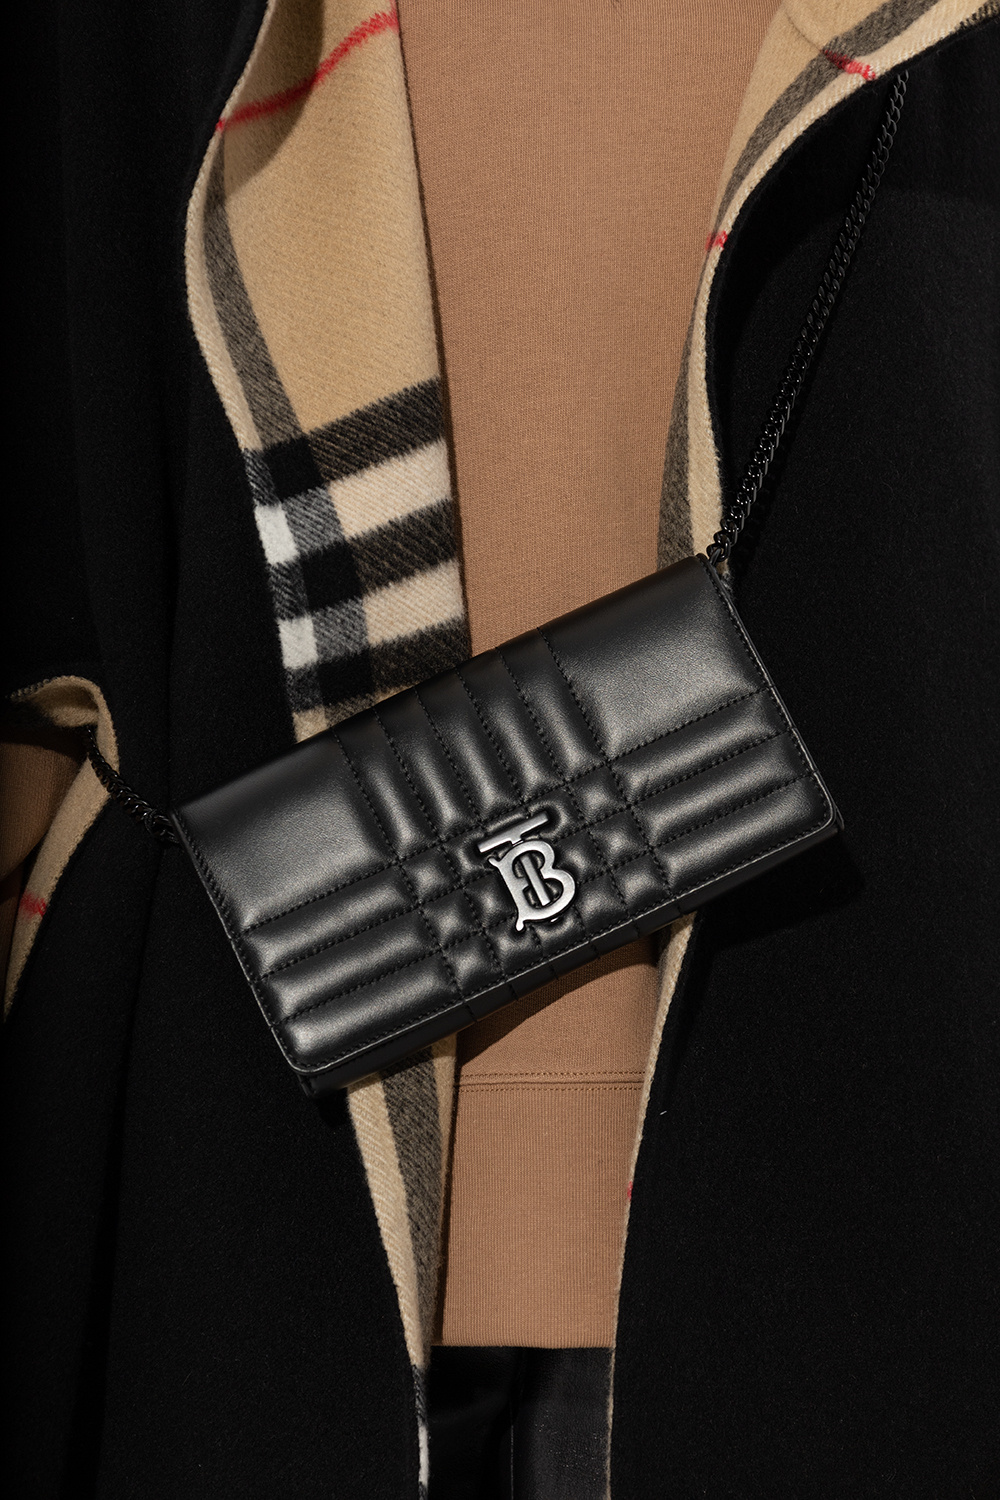 Burberry Burberry Debuts "Monogram" Collection Campaign Starring Gigi Hadid